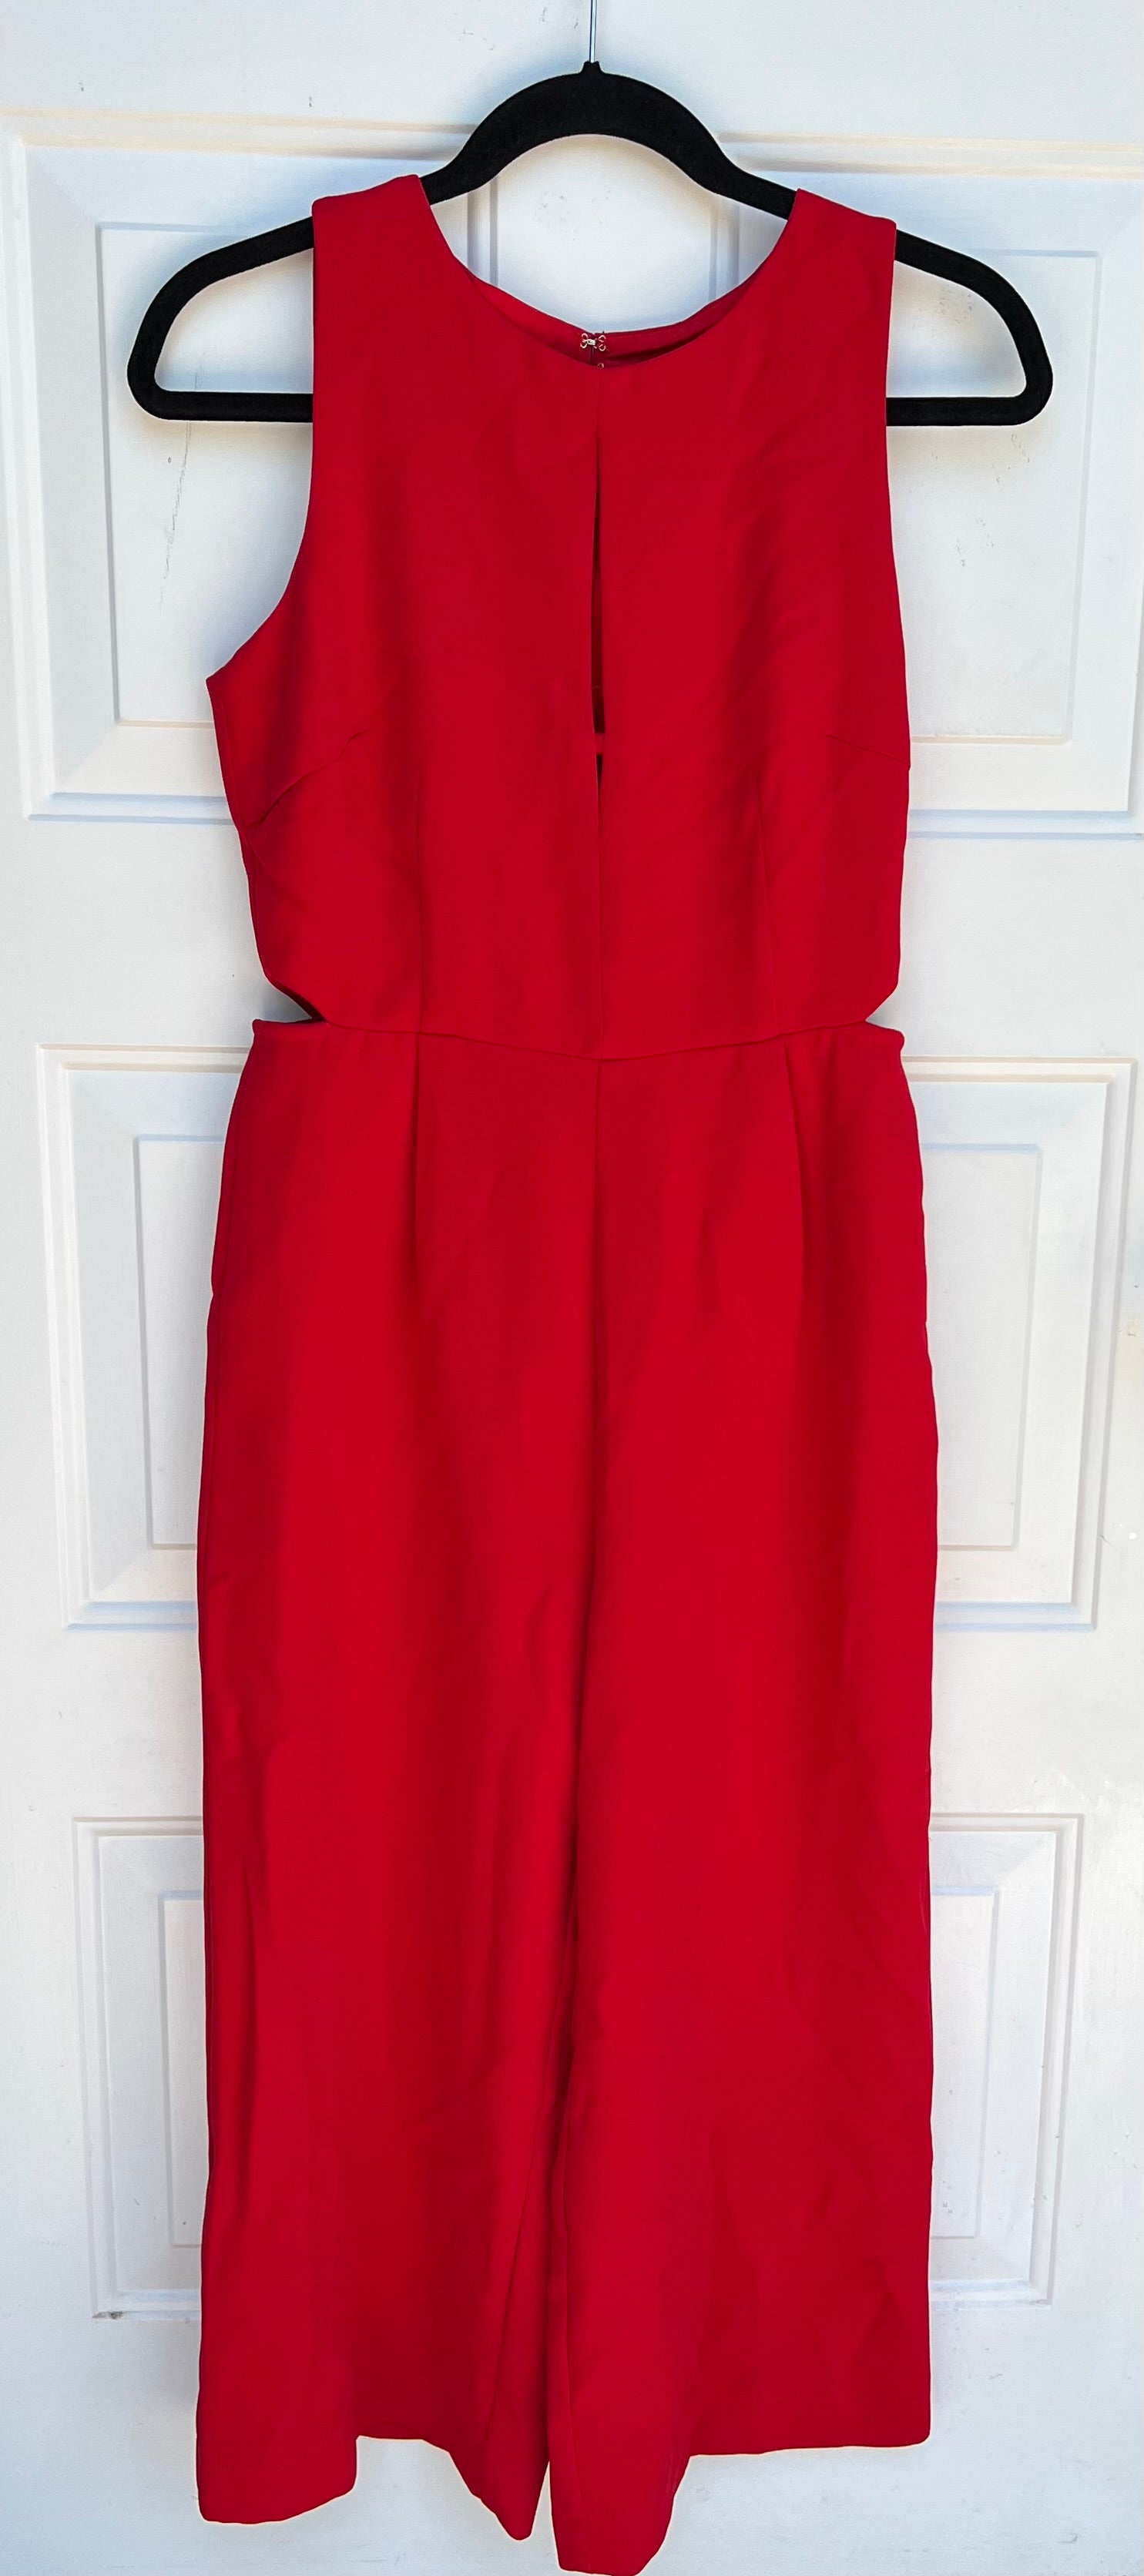 Greylin Red Artemis Cropped Jumpsuit Size Small